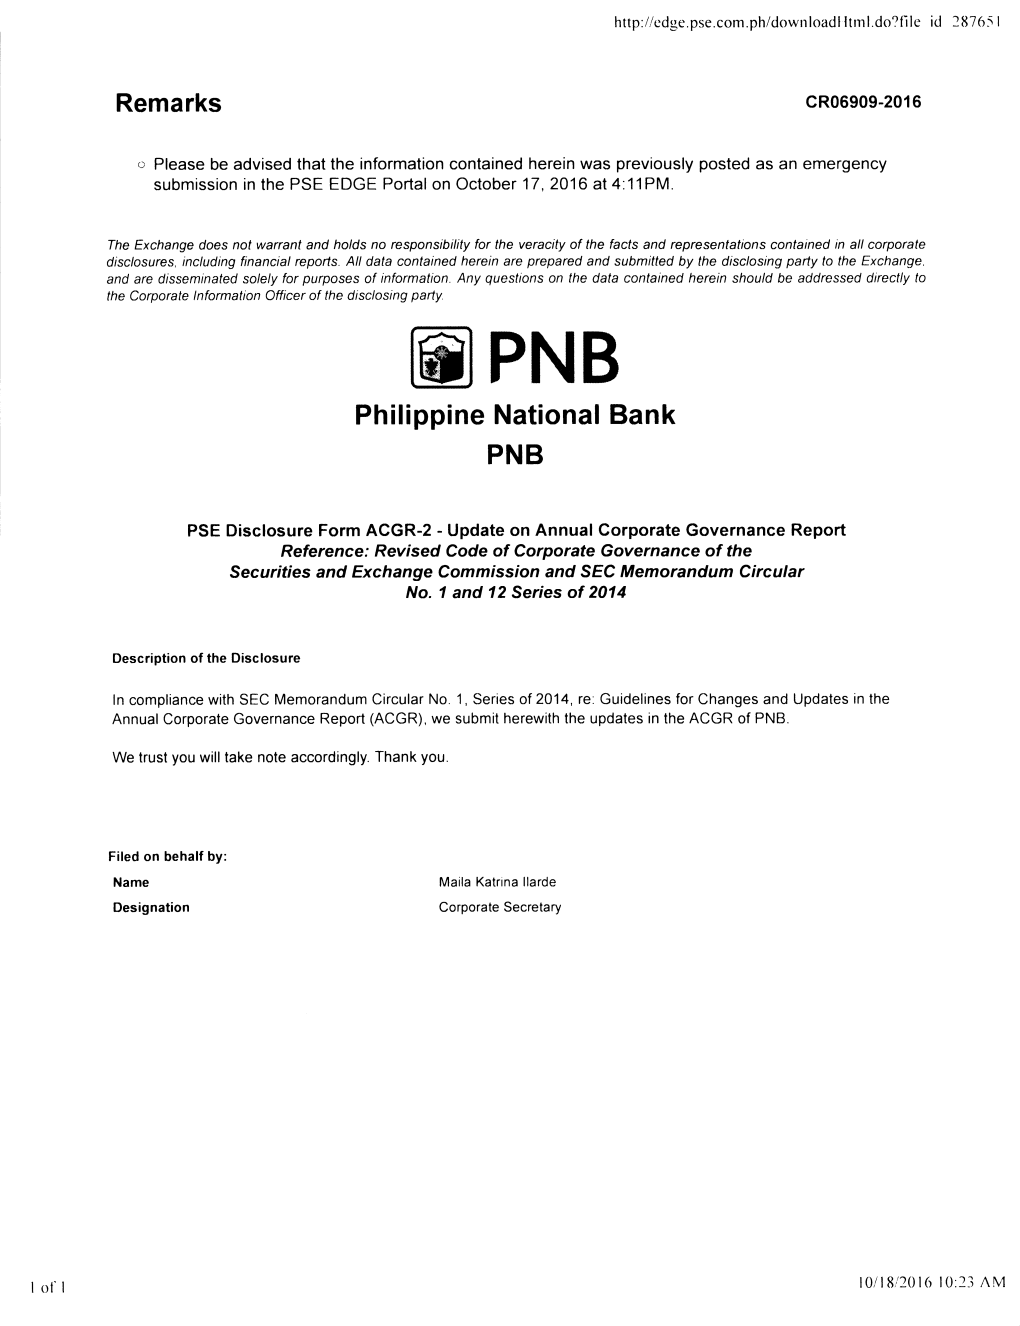 Updates in the ACGR of PNB